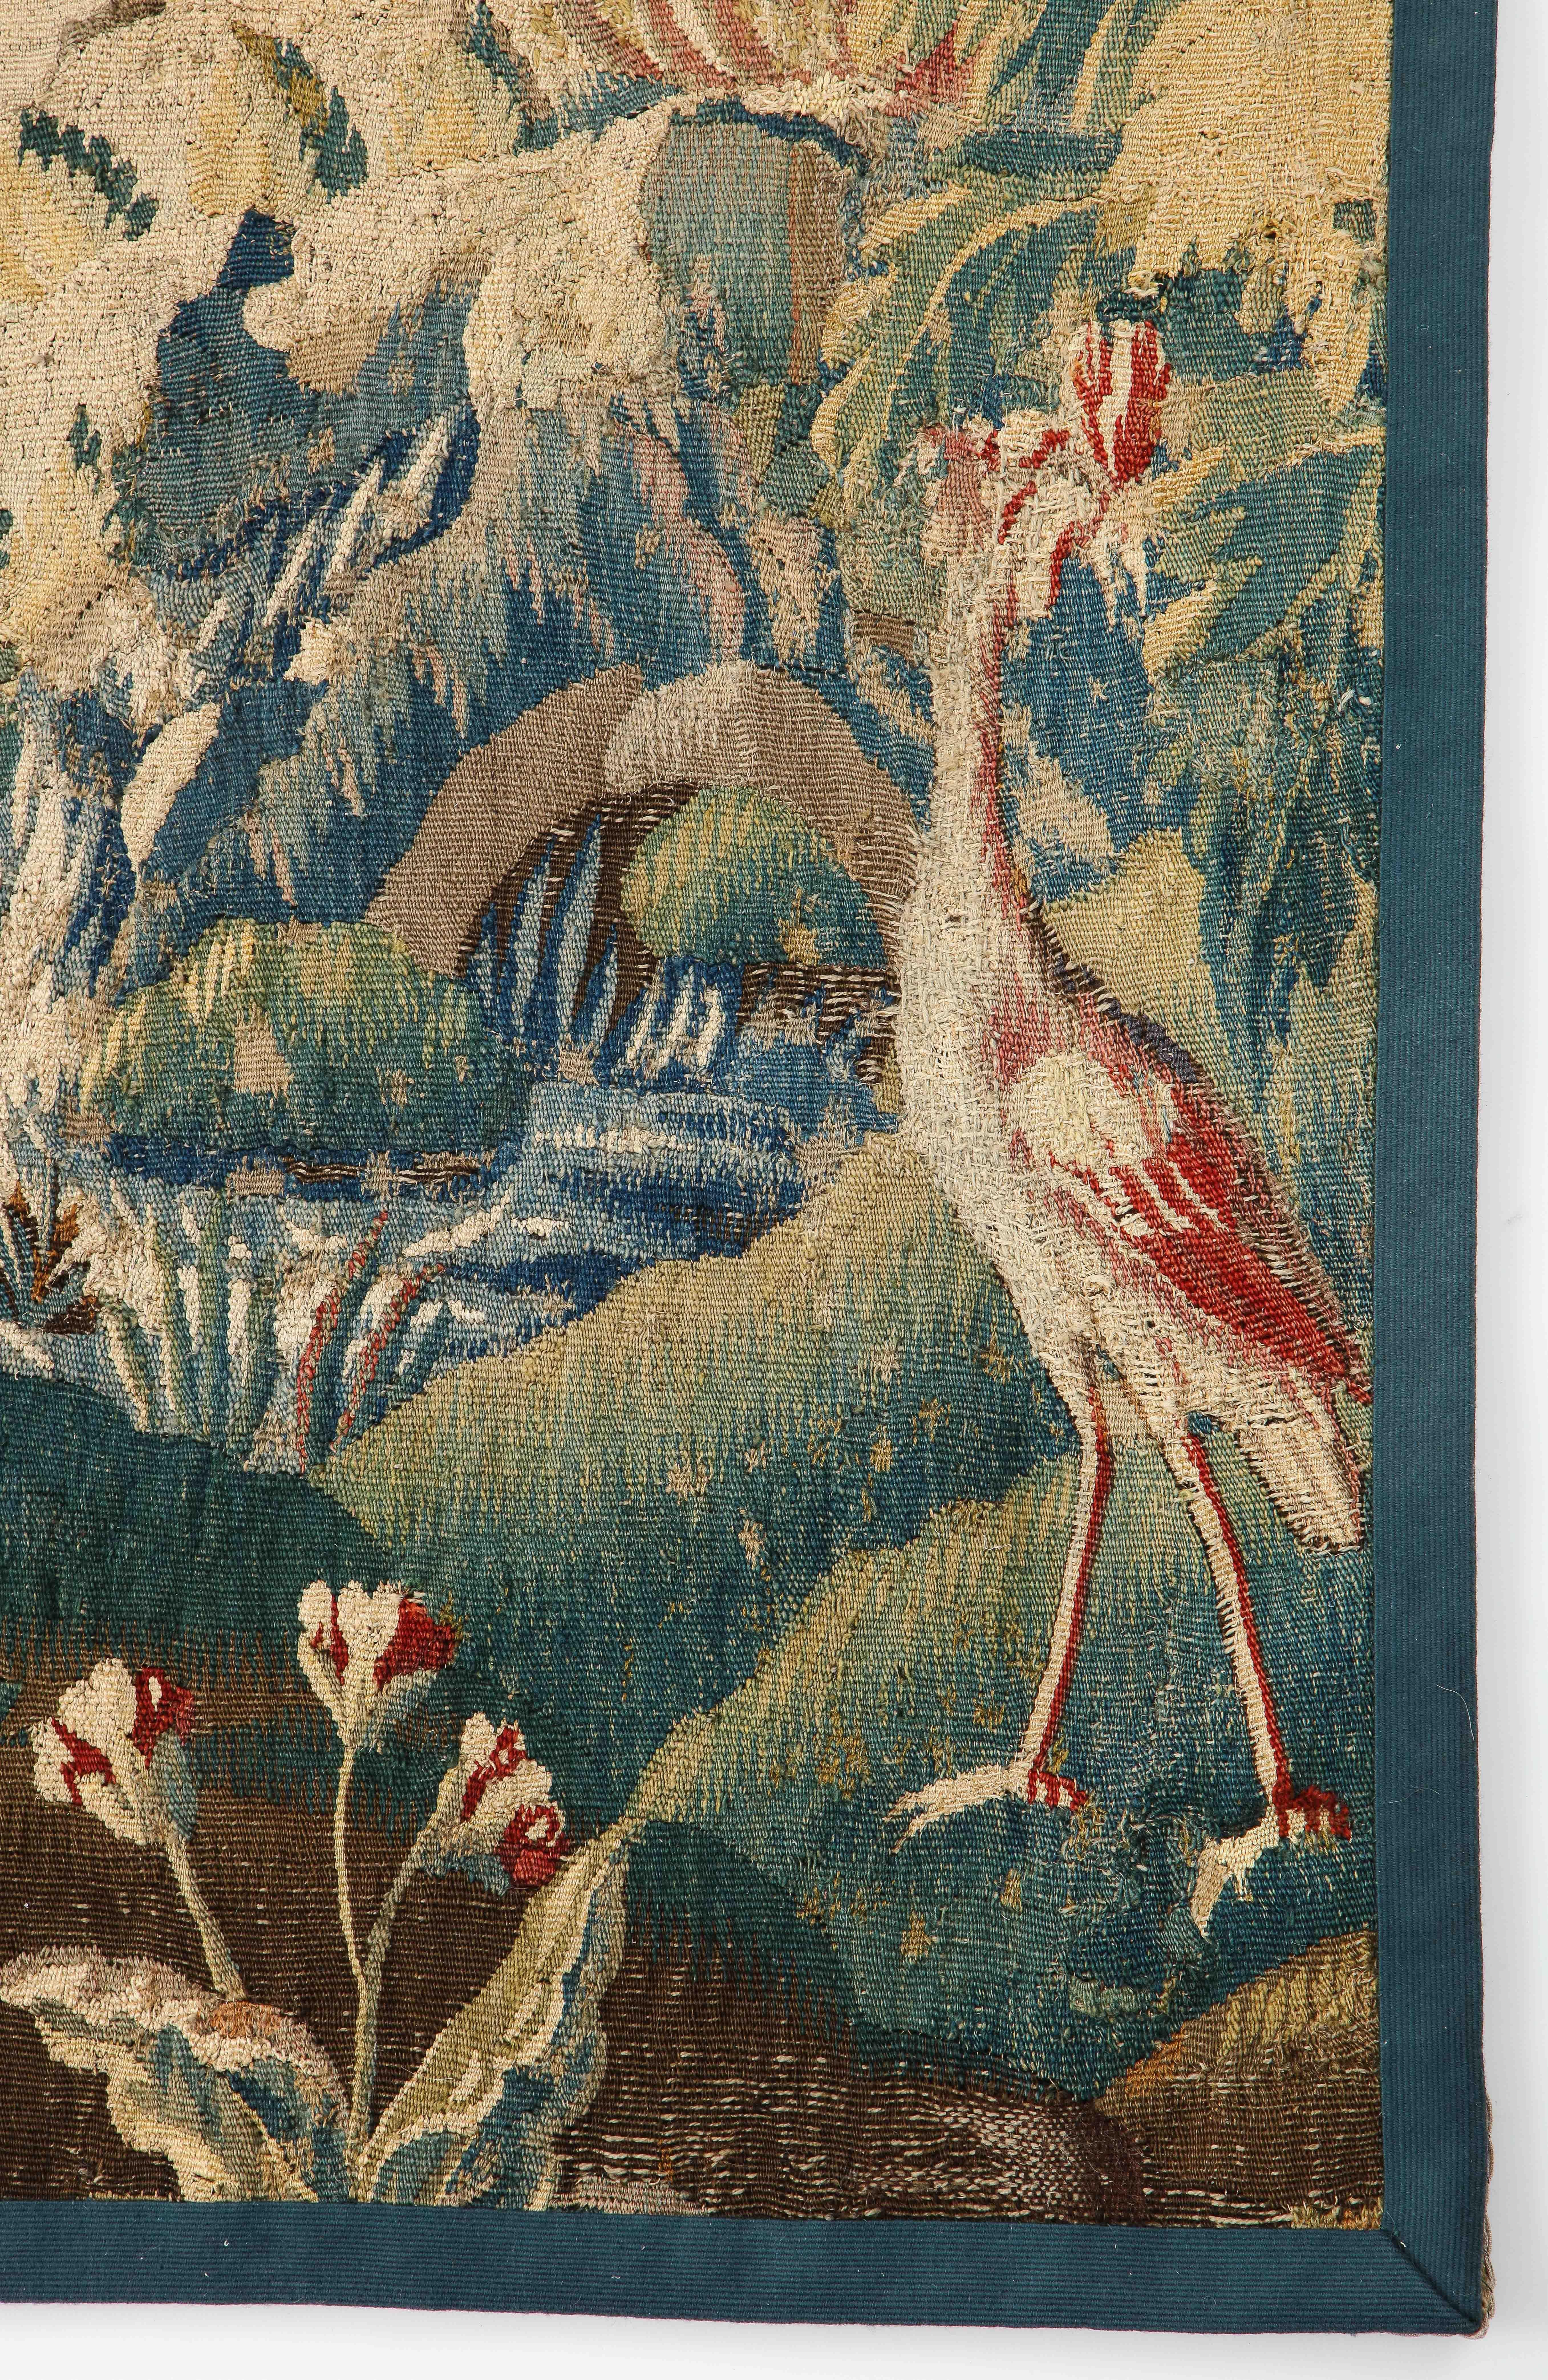 An 18th century verdure Aubusson tapestry handwoven in wool. This pastoral scene is composed of stylized trees, flowering plants and birds near a body of water surrounded by hills. This is one of two panels in our collection. The workmanship of this